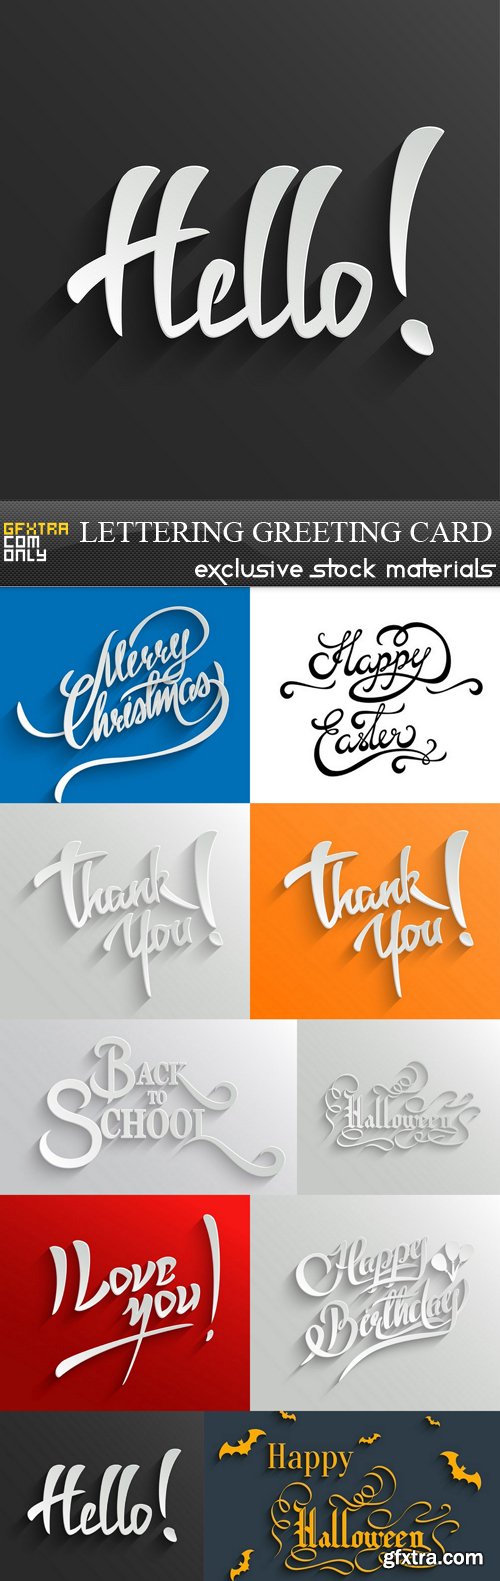 Lettering Greeting Card - 13 EPS